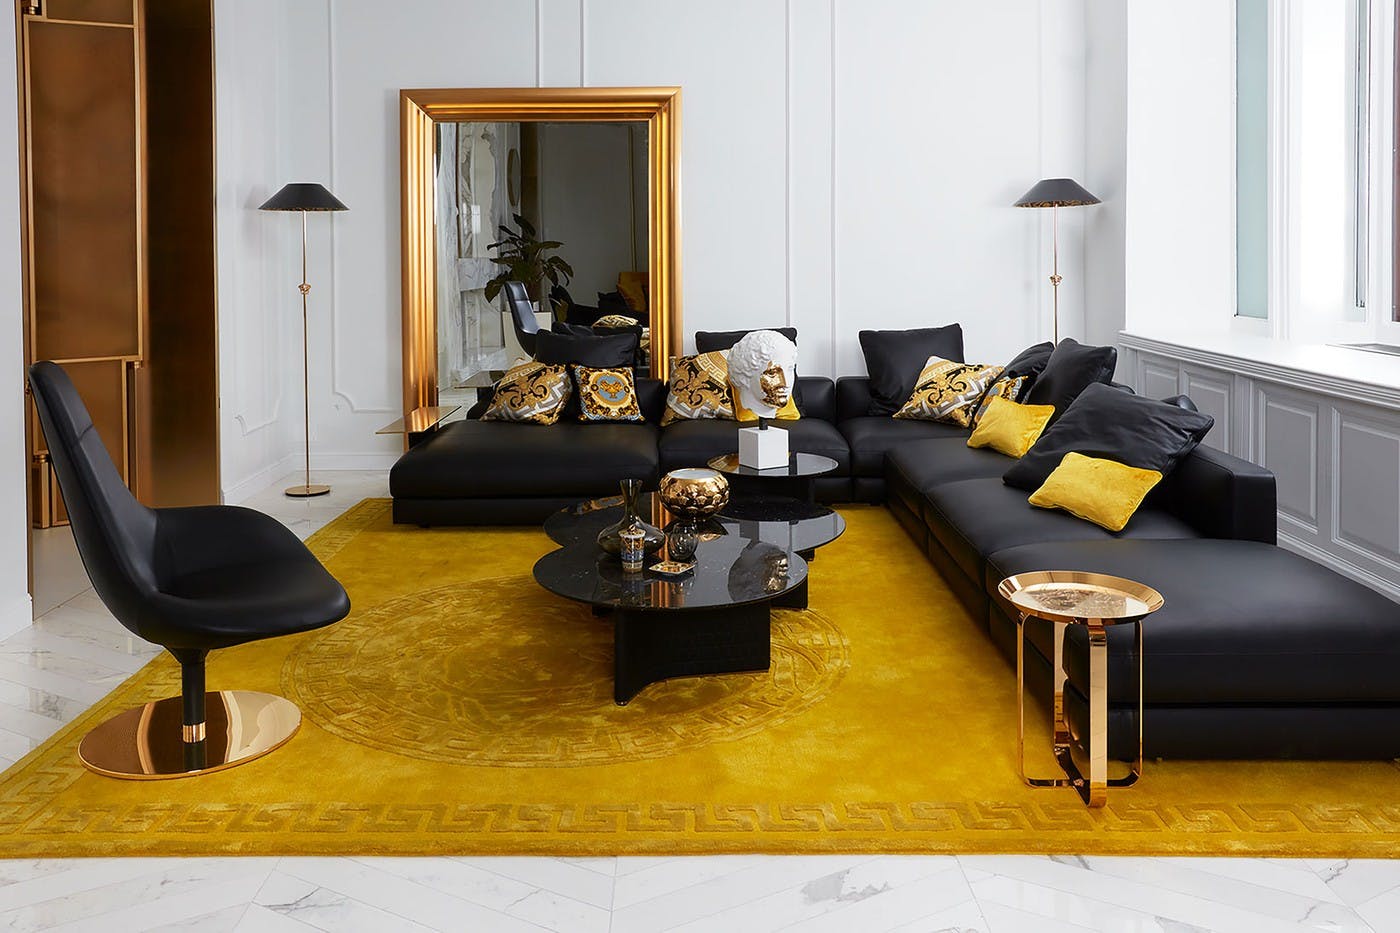 Versace Home opens a new flagship store in Milan